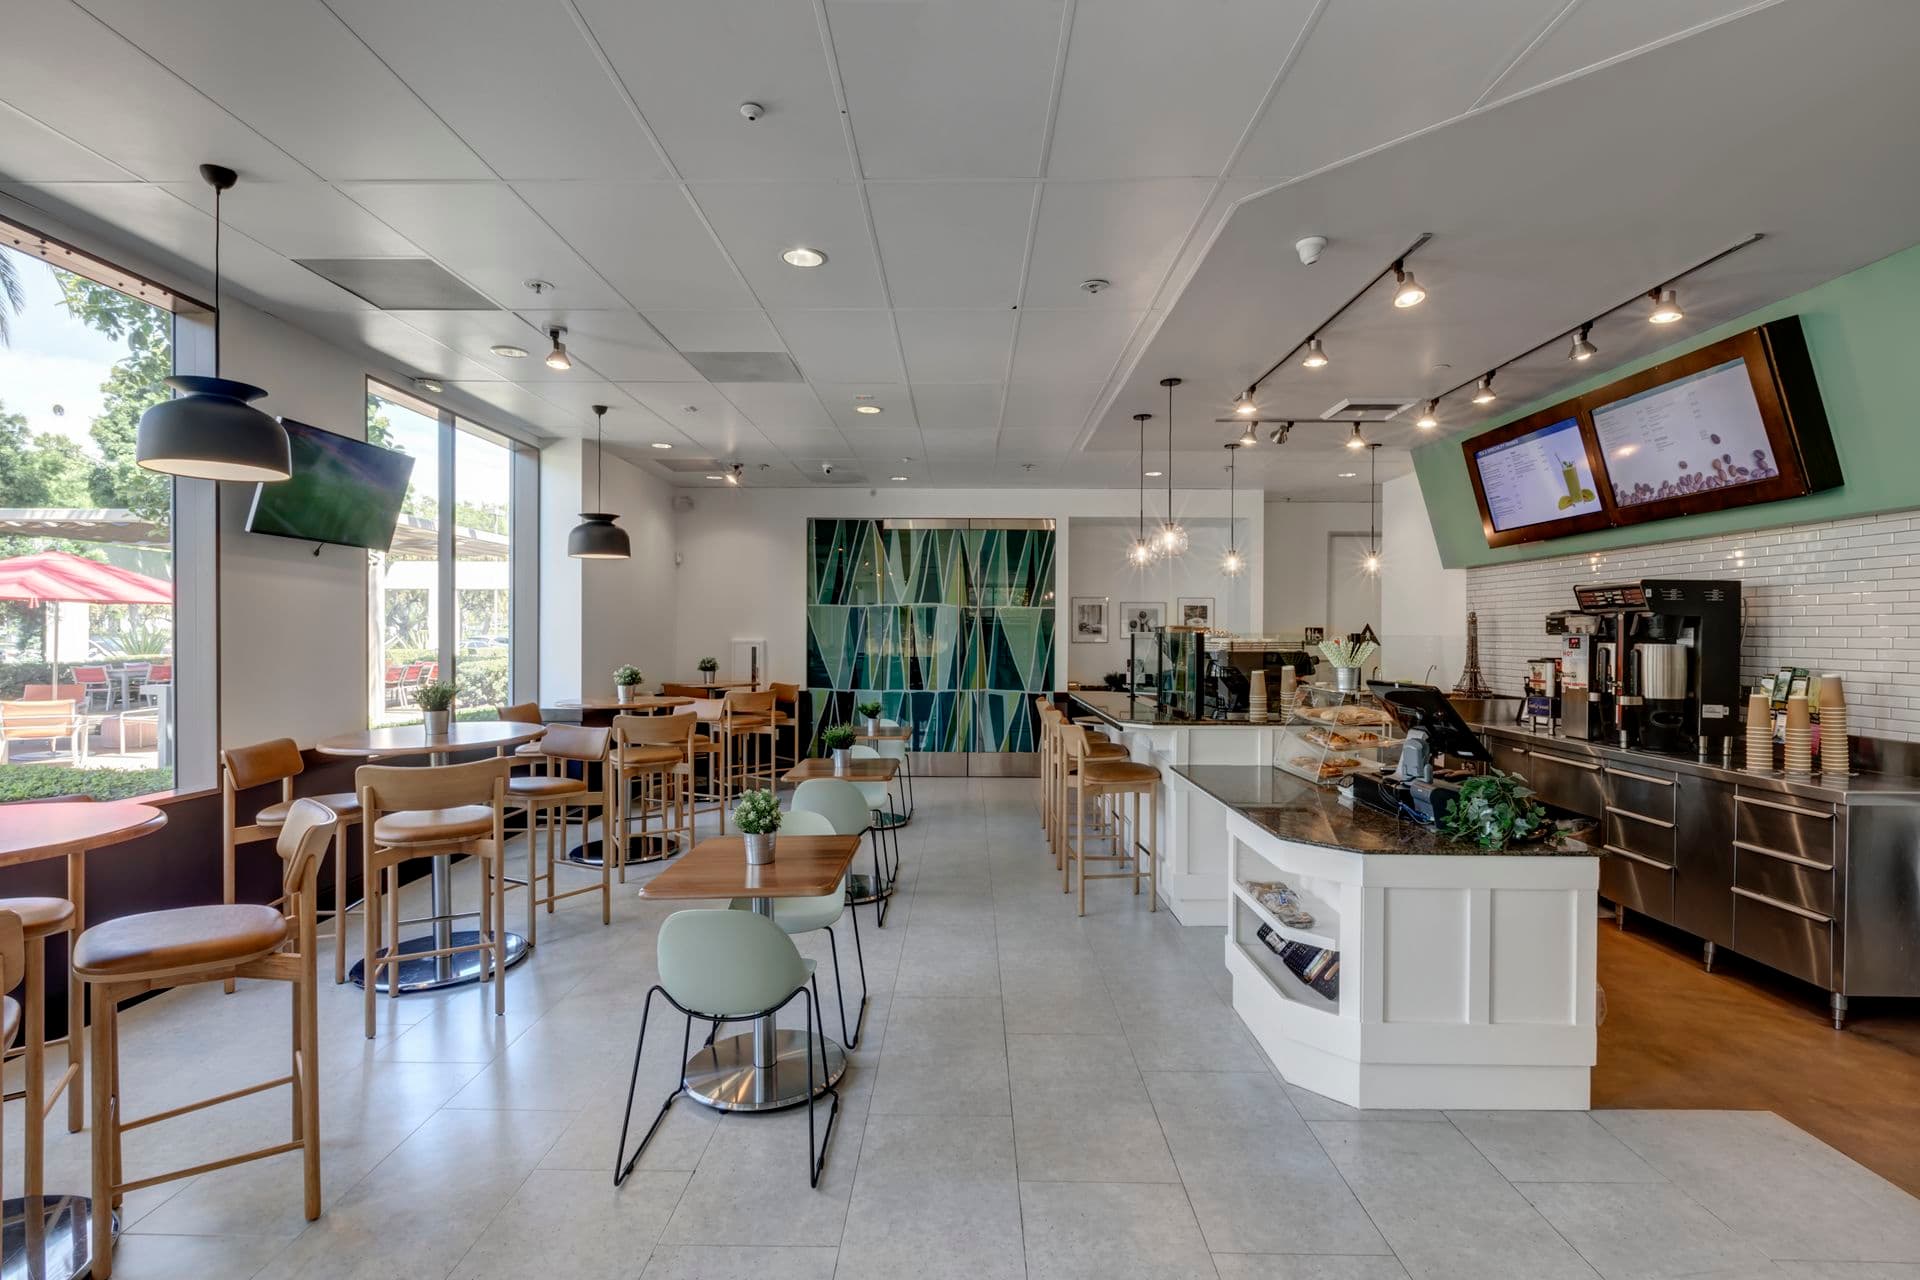 Interior photography of Cafe 350 at 350 Commerce at Market Place Center, Irvine, Ca